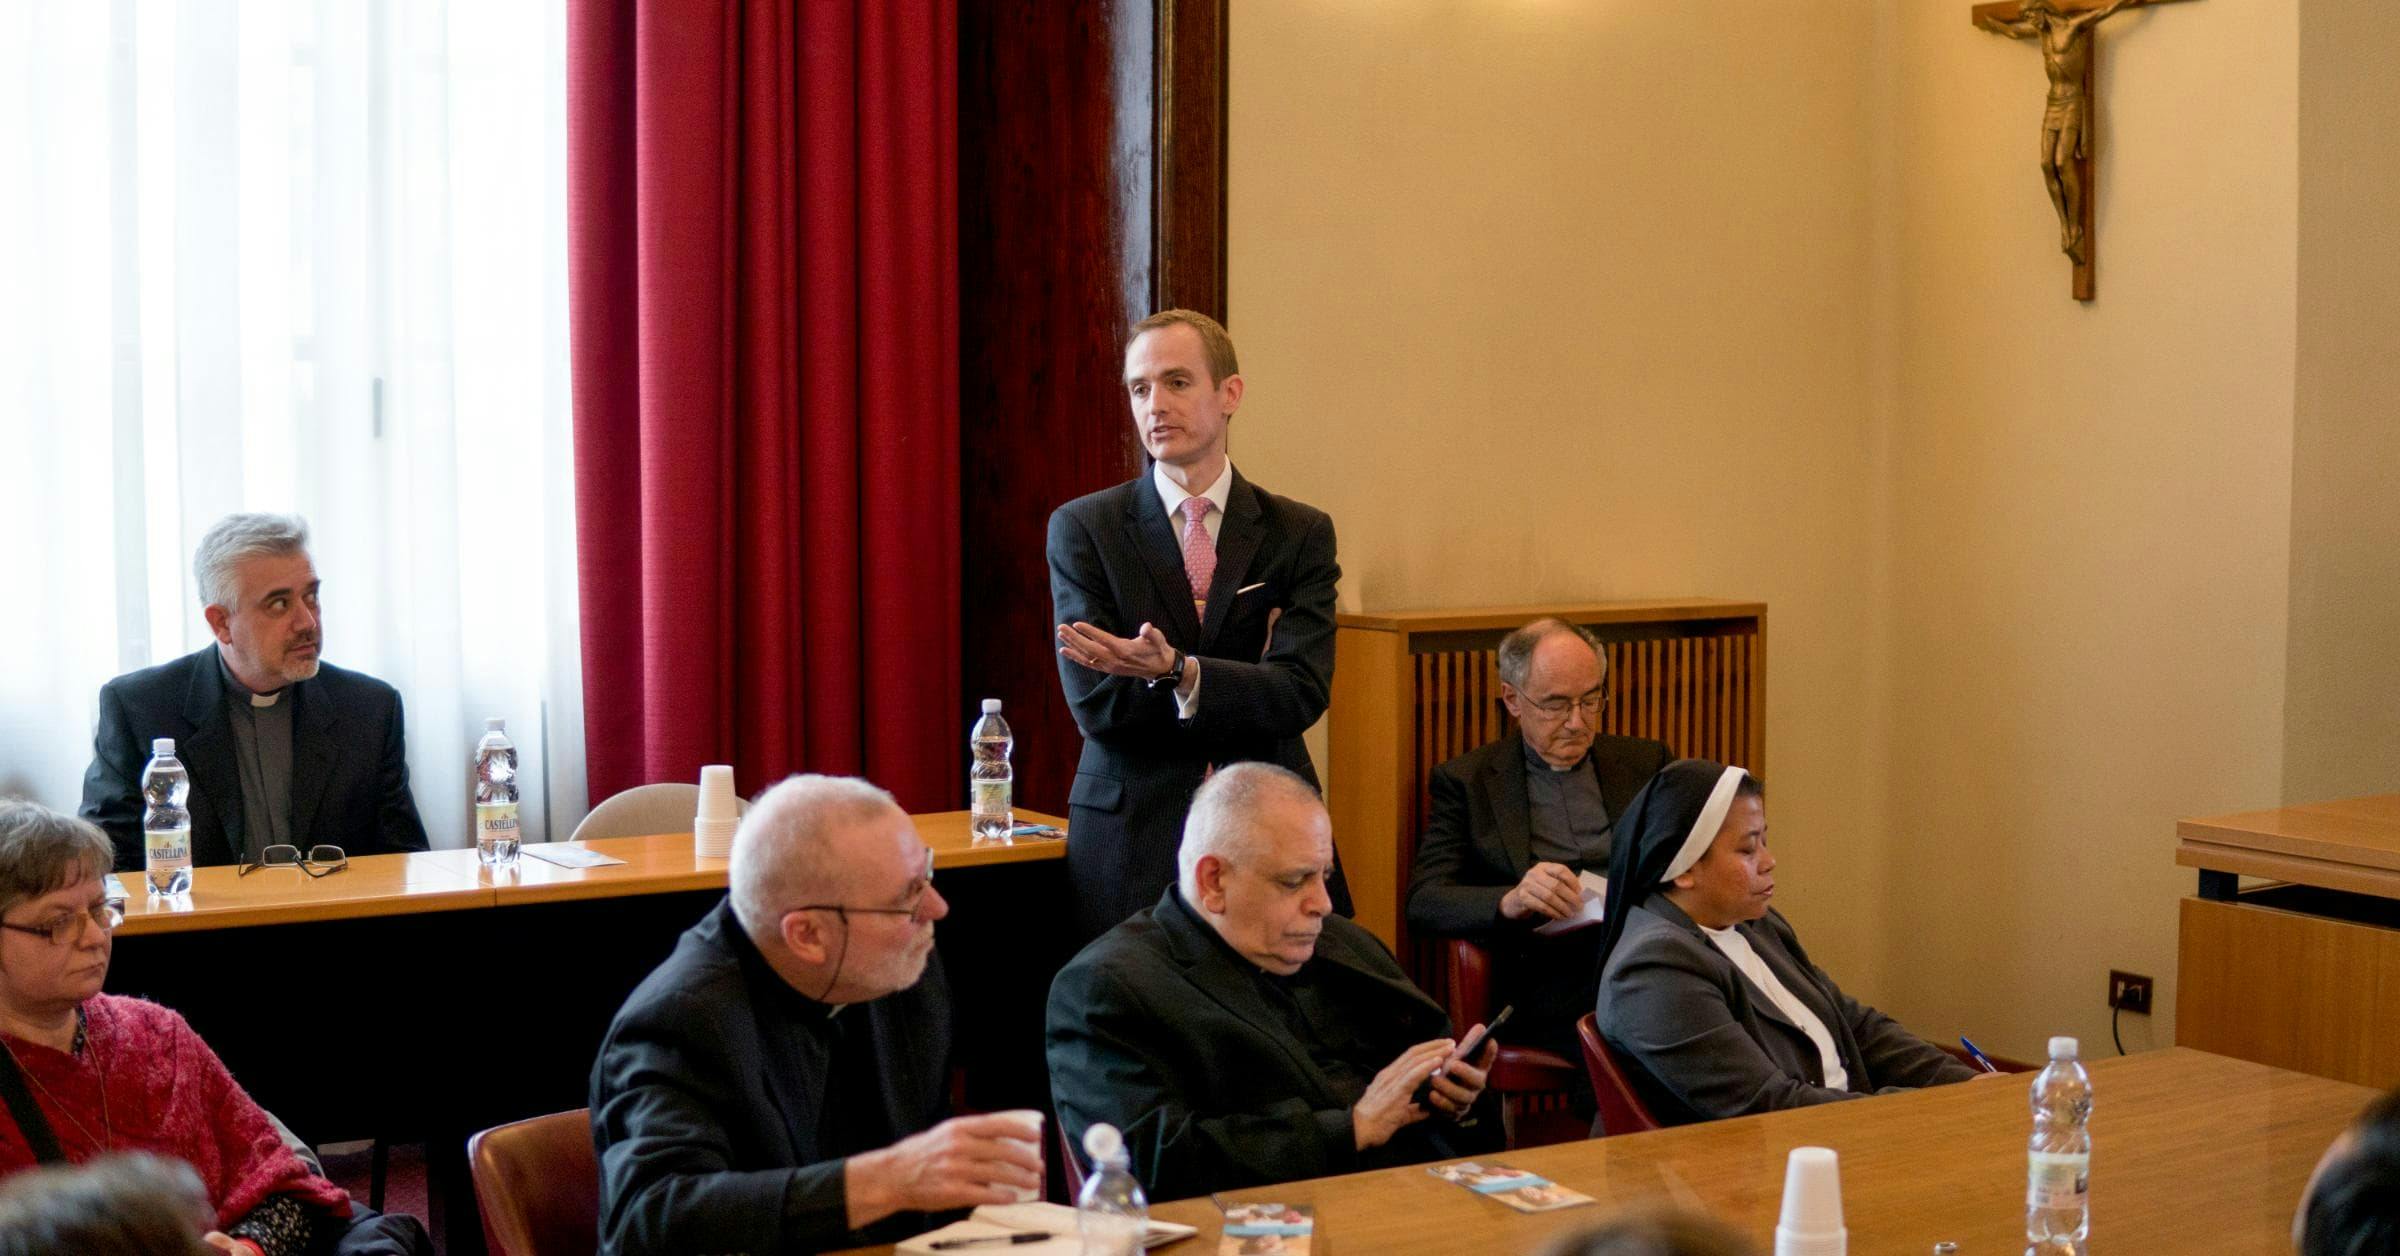 Matthew Sanders, CEO of Longbeard, presenting at the official website launch of the Migrants and Refugees Section at the Vatican. Cardinal Czerny and Fr. Fabio, leaders of the Section, in the background.